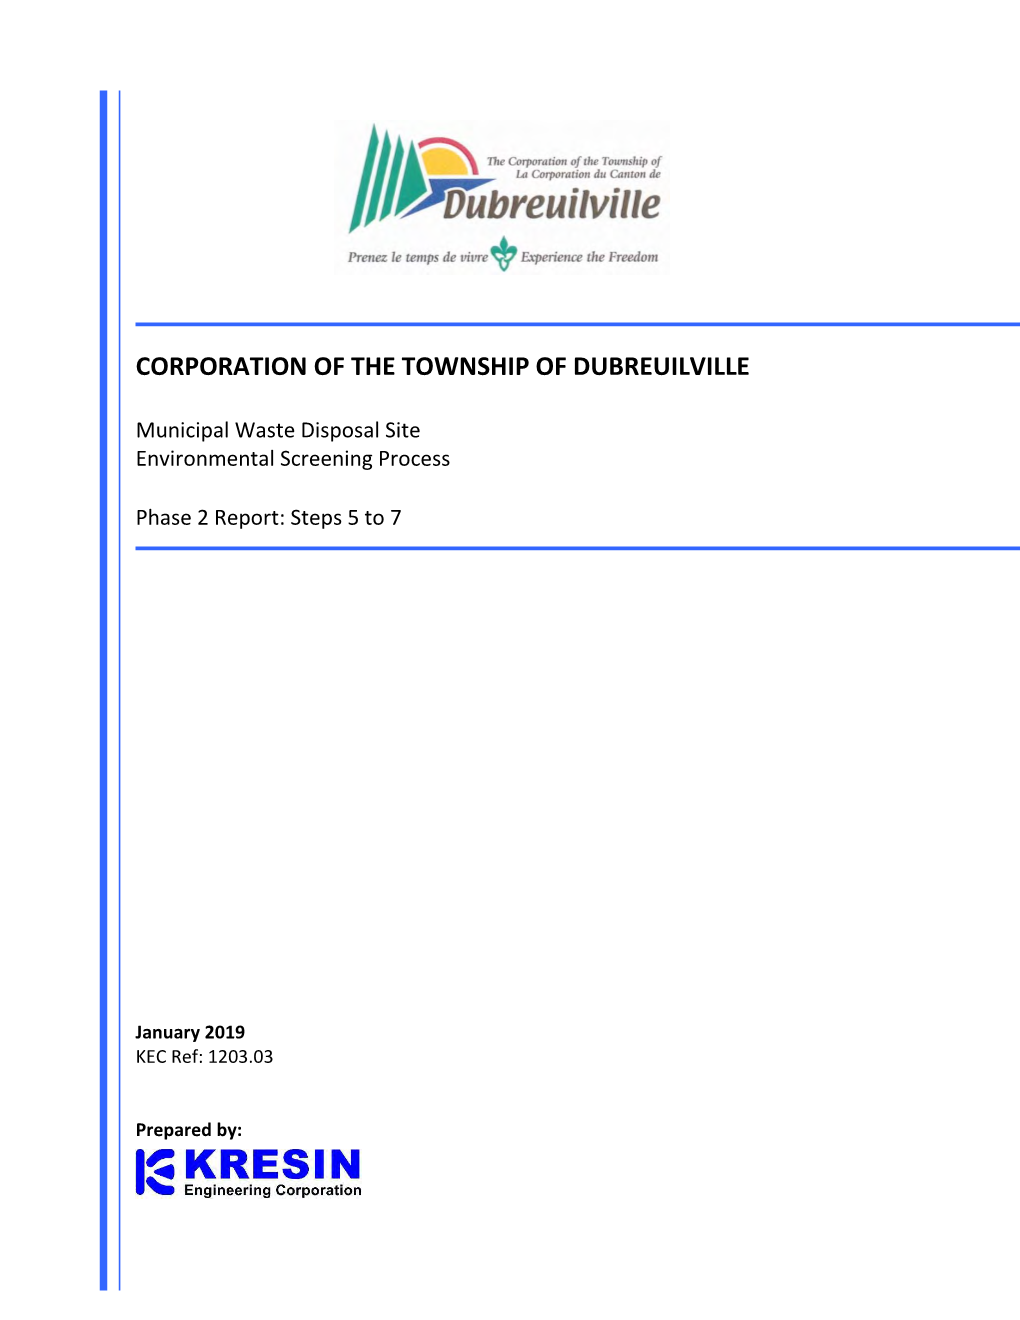 Corporation of the Township of Dubreuilville